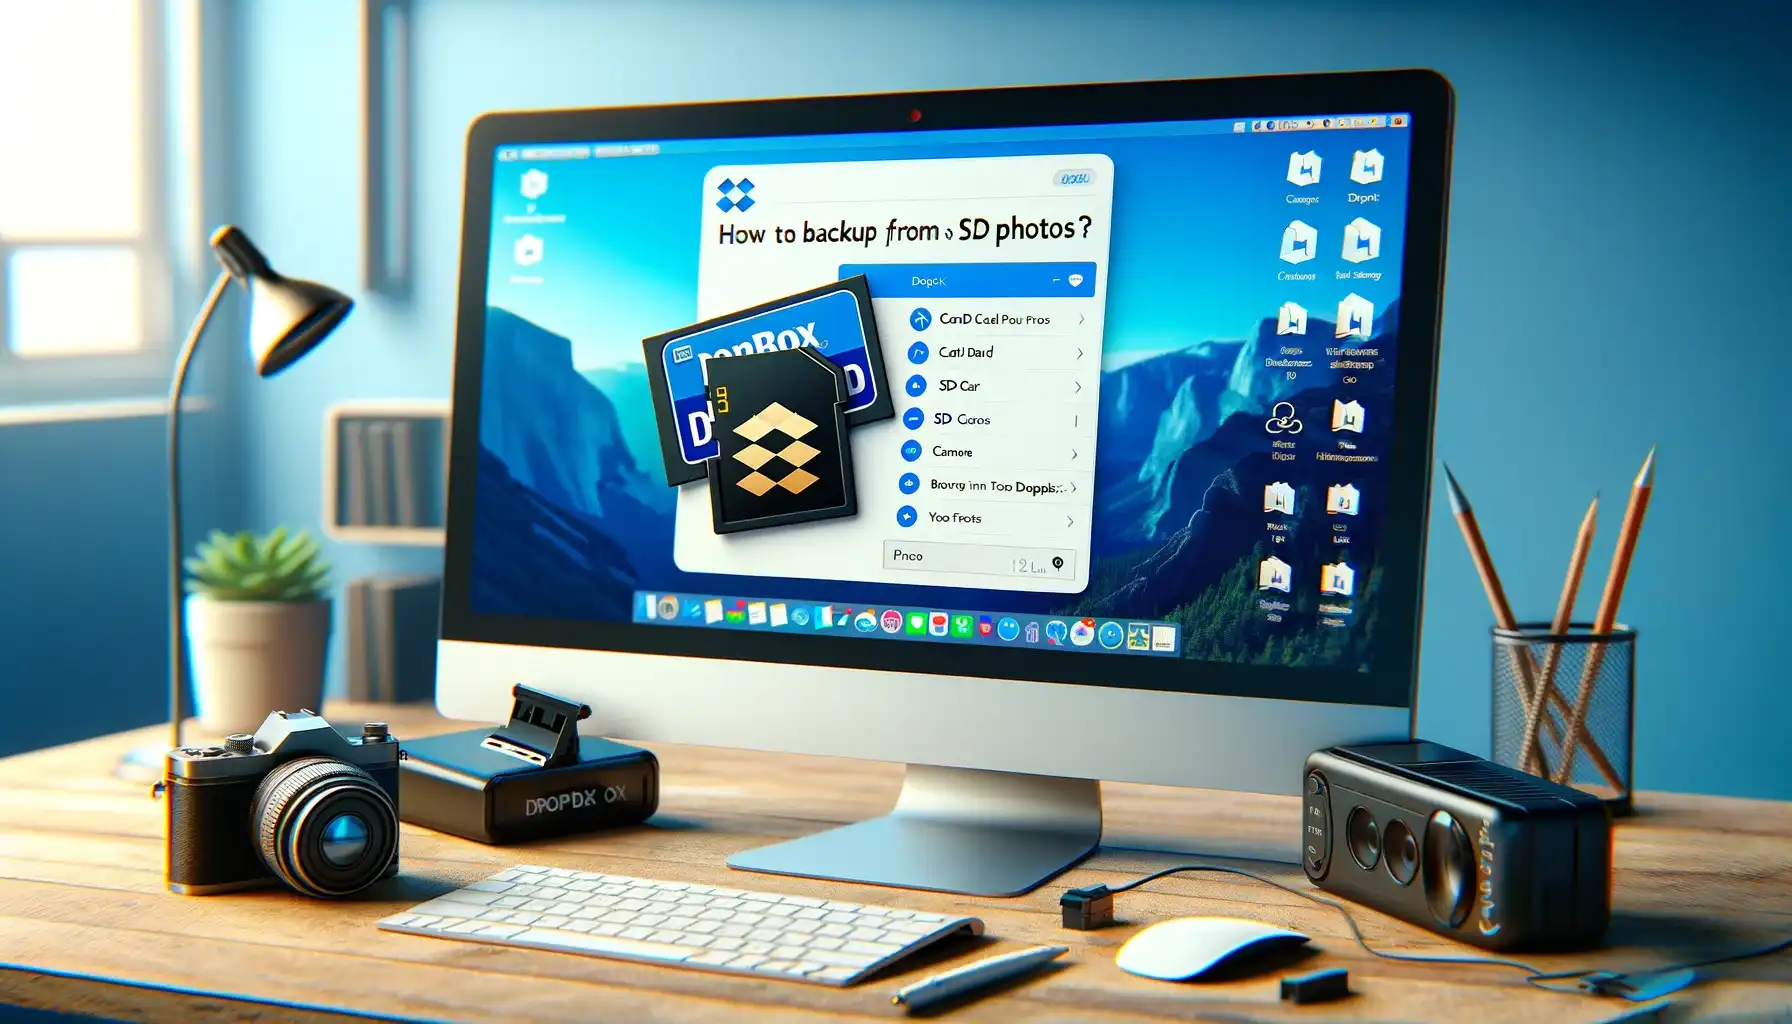 How to Backup Photos from SD Card to Dropbox on Windows PC